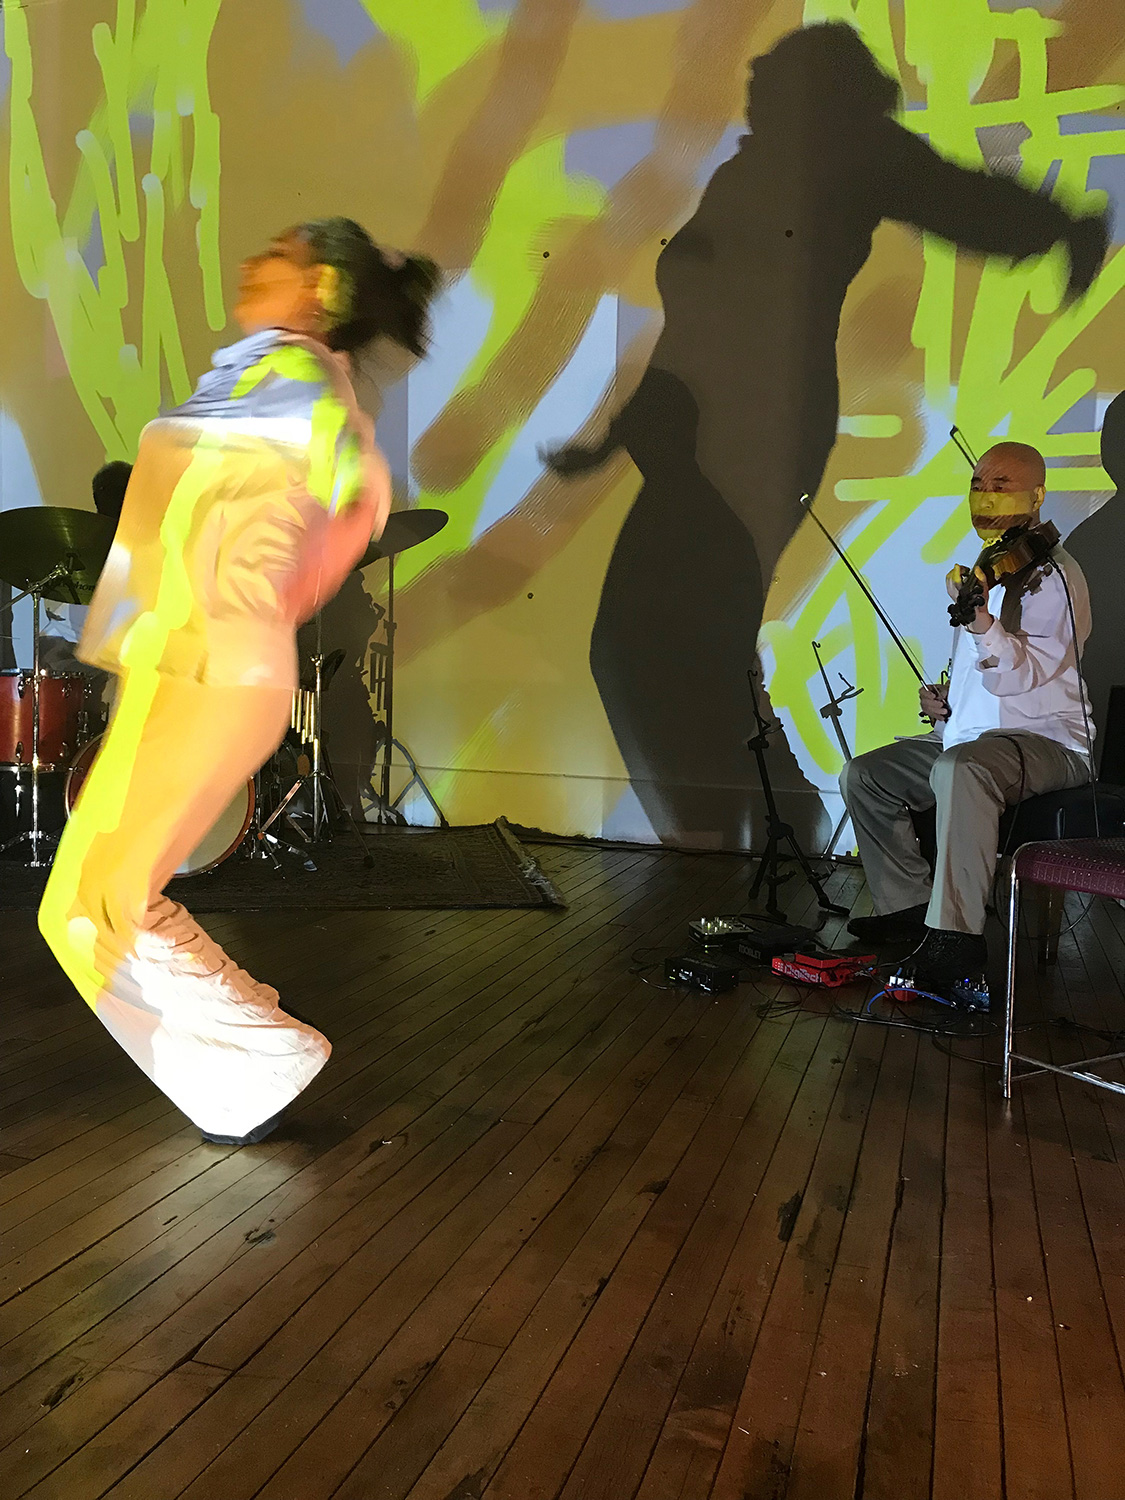 patricia nicholson dances with with jason kao hwang playing violia before a painted wall